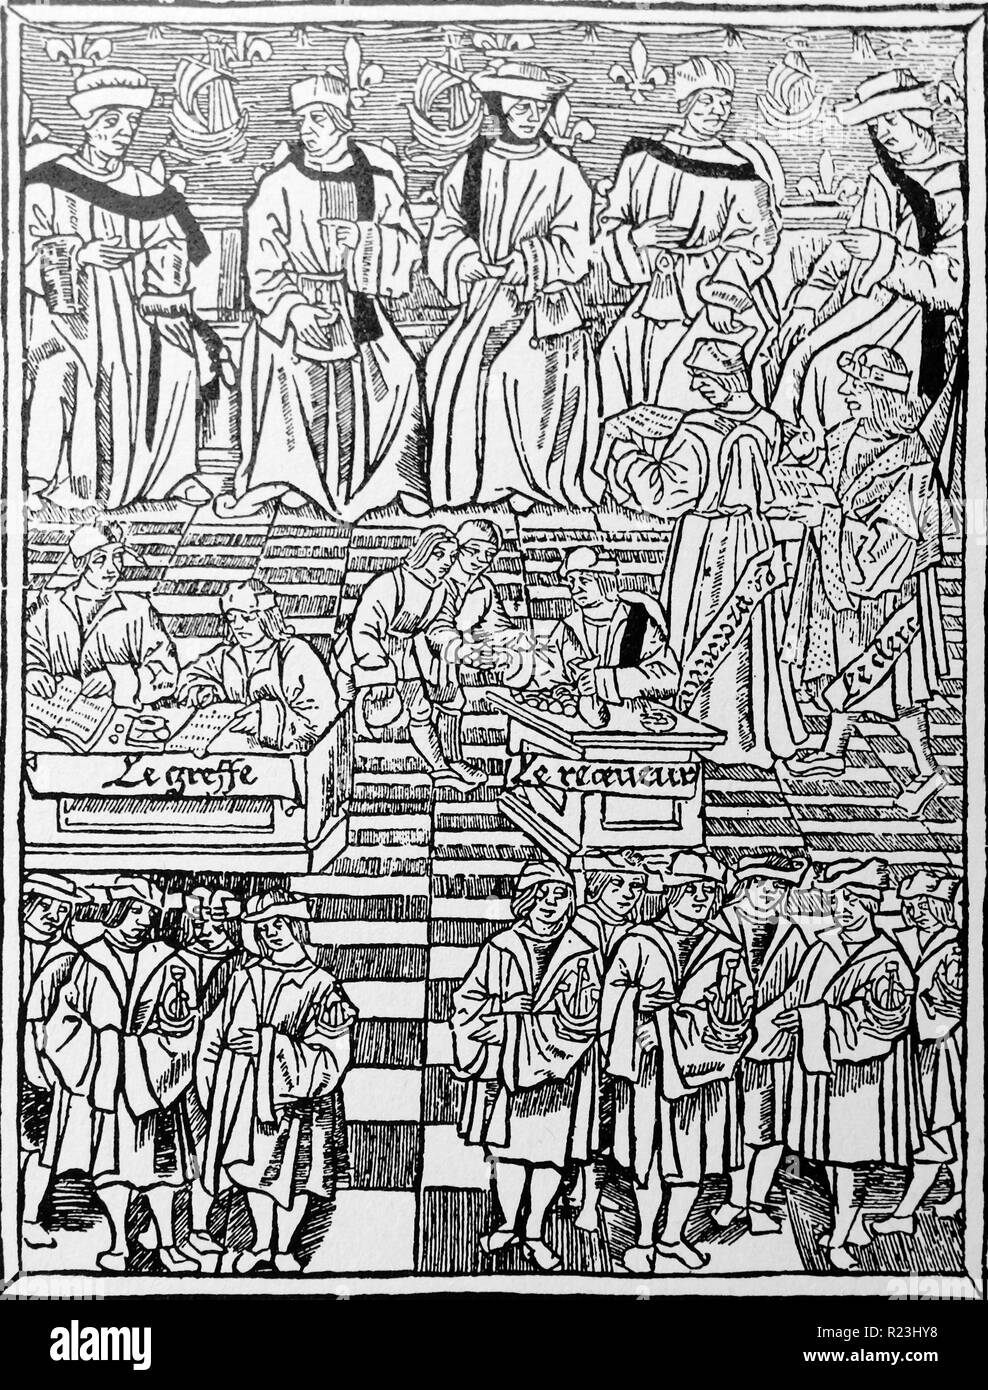 Woodcut depicting the Municipal court of Paris. The Provost presides over with other high officials depicted in the upper portion with other high officials, whilst in the lower portion merchant's and burgesses' representatives are in the foreground. Dated 16th Century Stock Photo